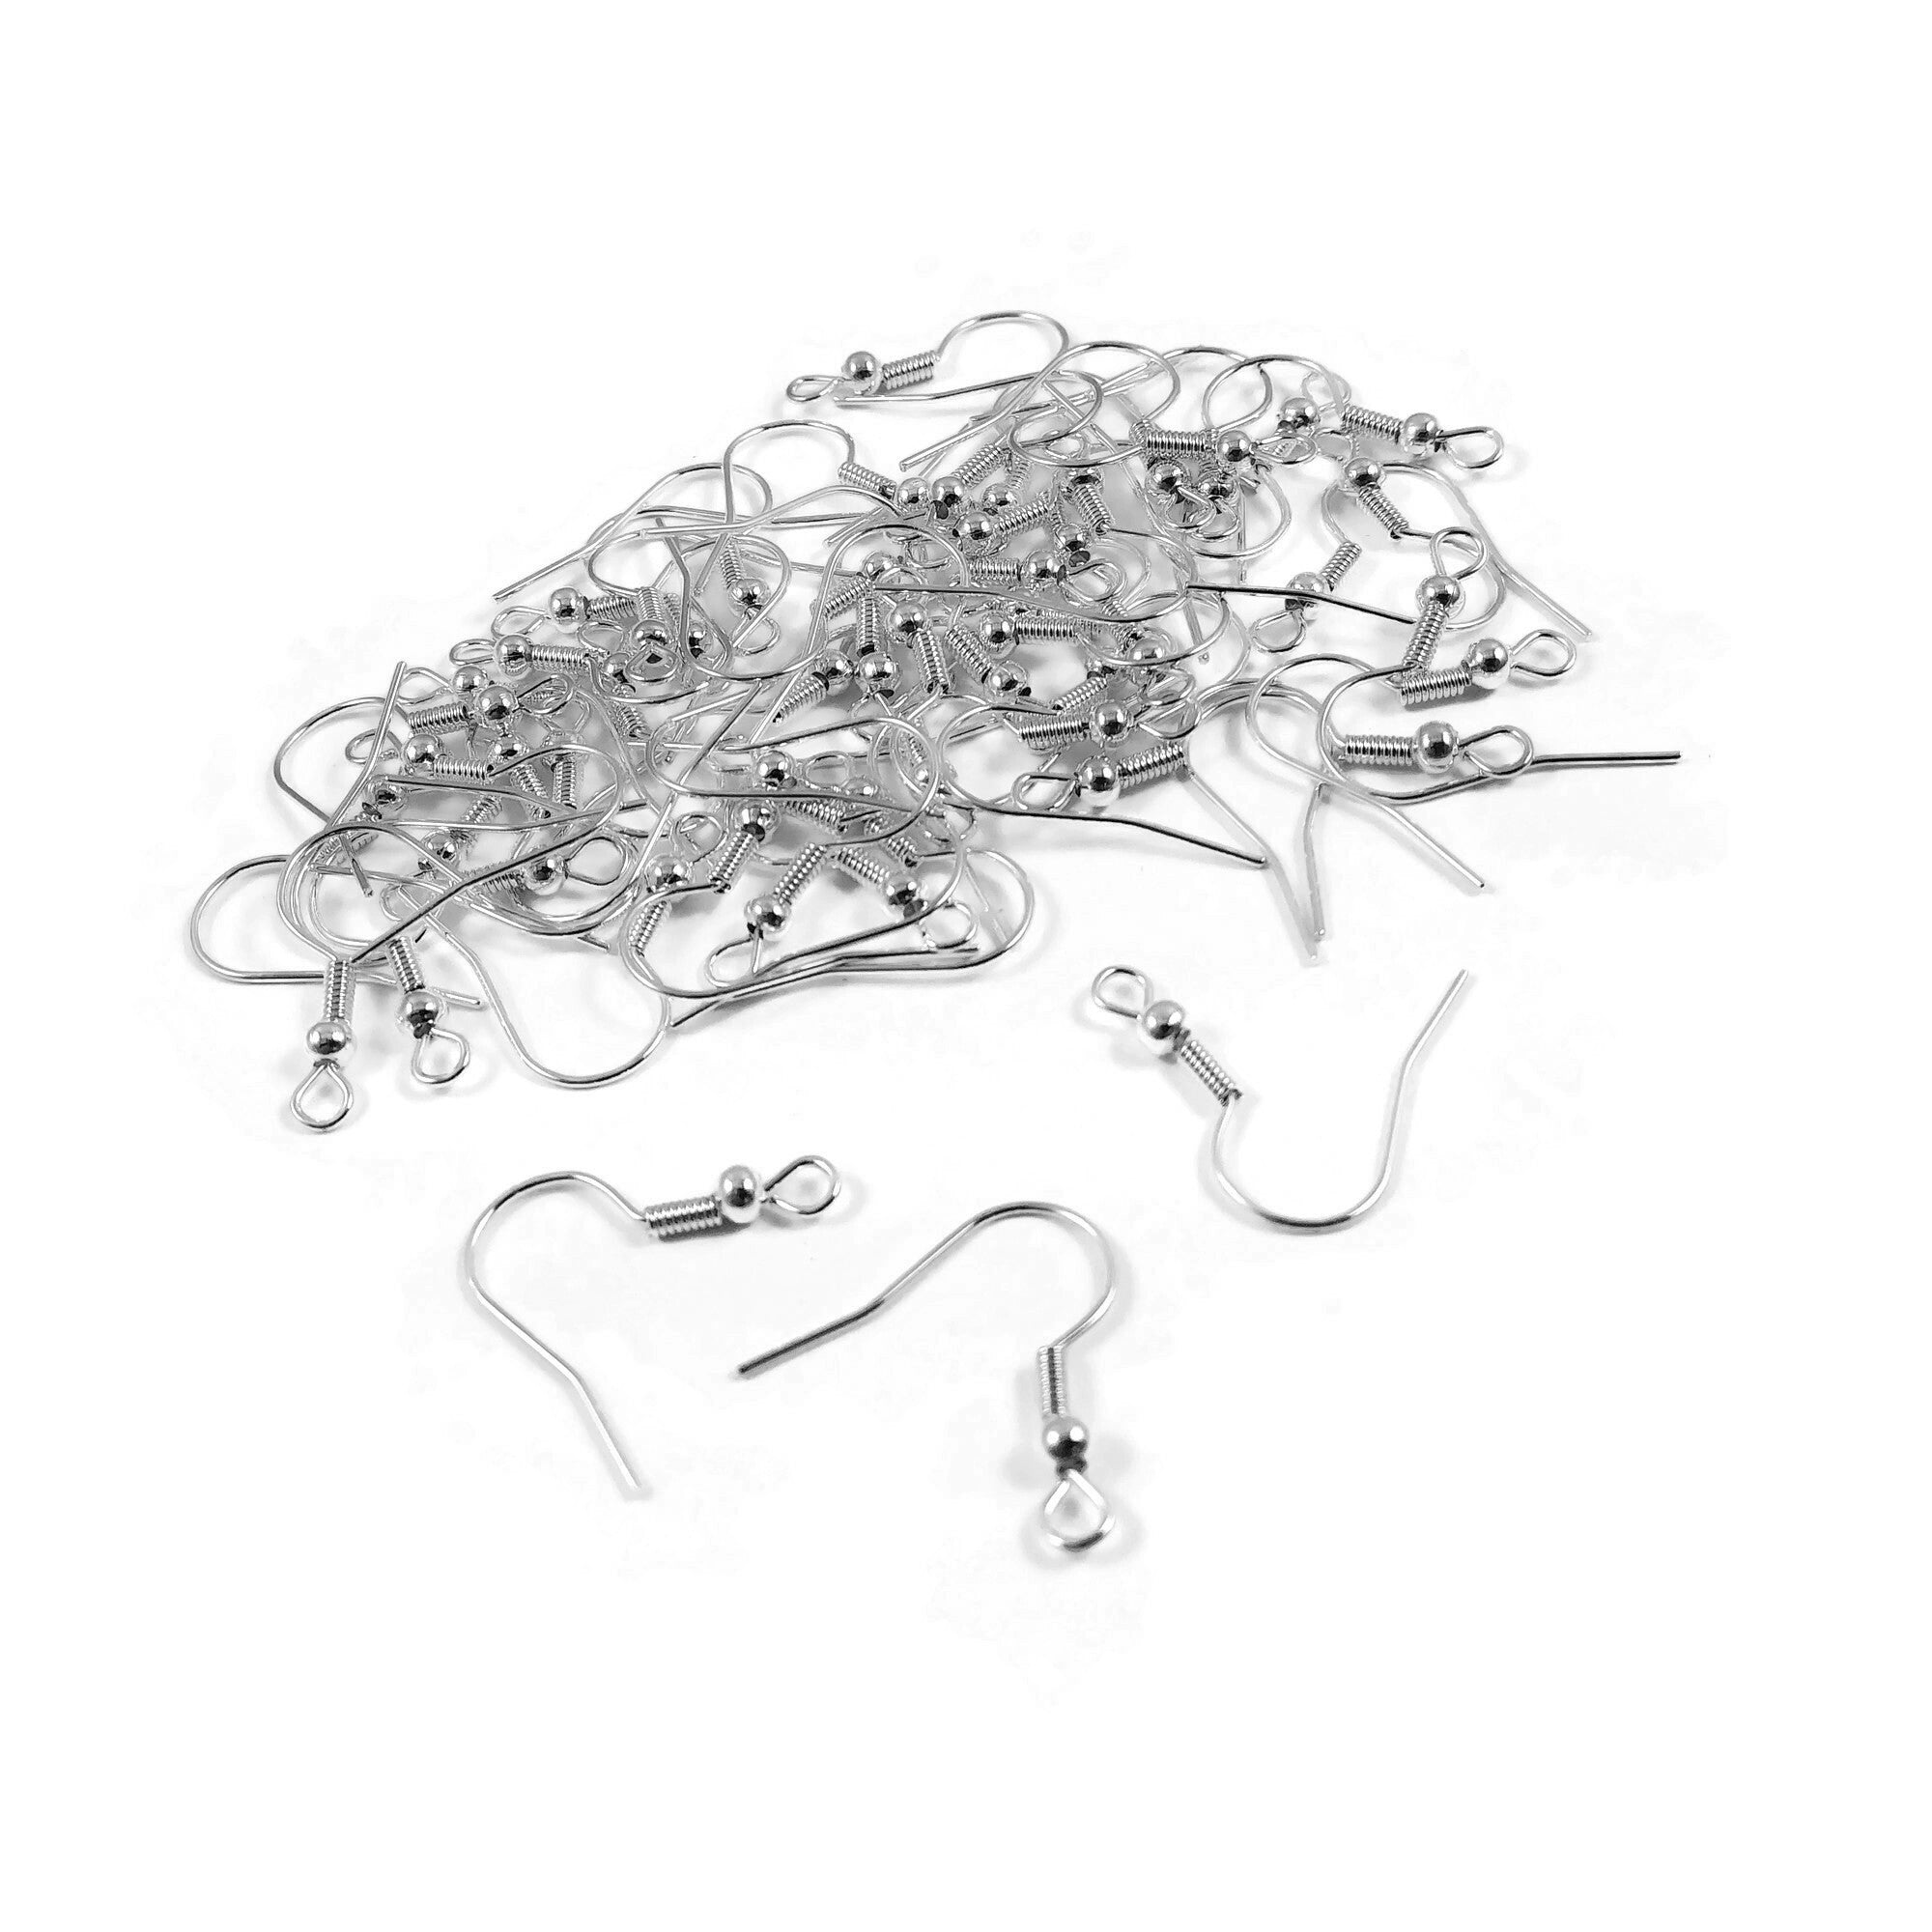 50,100,150,200 pieces Silver Plated Ear Wires,Drop Earring Wire, hook  earring with loop, Silver metal earwires,Wholesale